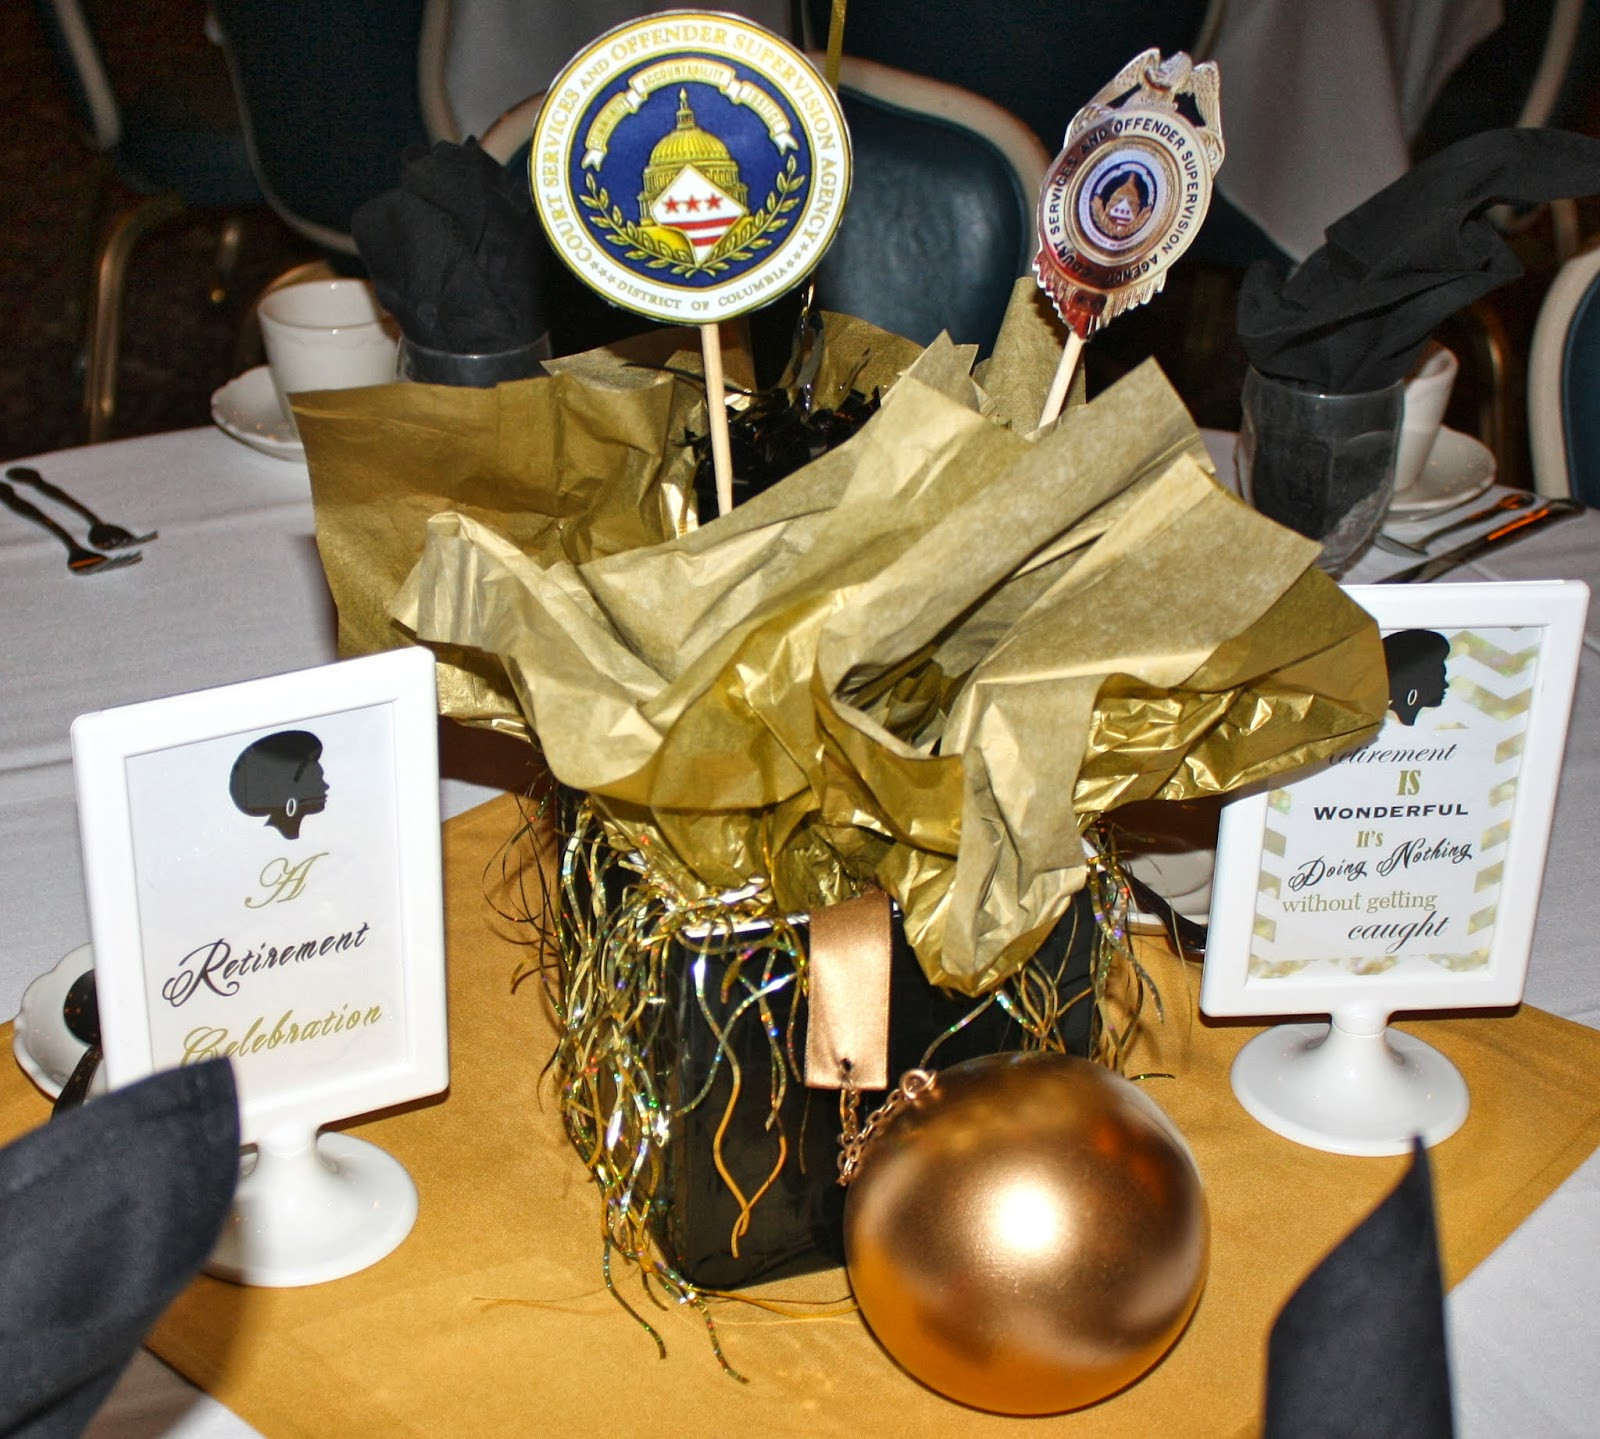 Centerpiece Ideas For Police Retirement Party
 Enchanted Expectations November 2013